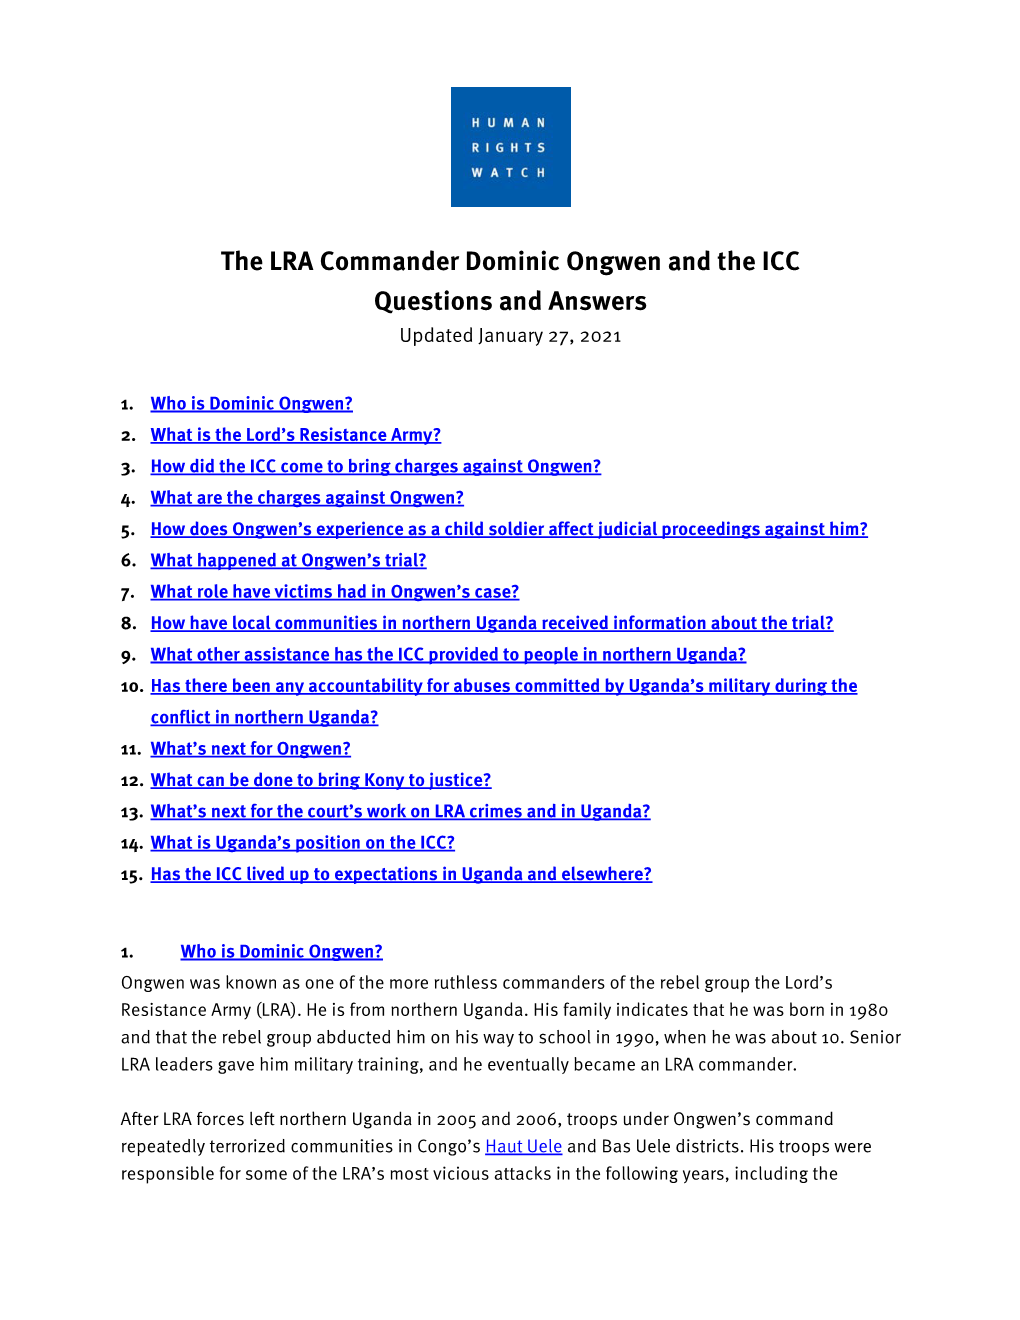 The LRA Commander Dominic Ongwen and the ICC Questions and Answers Updated January 27, 2021